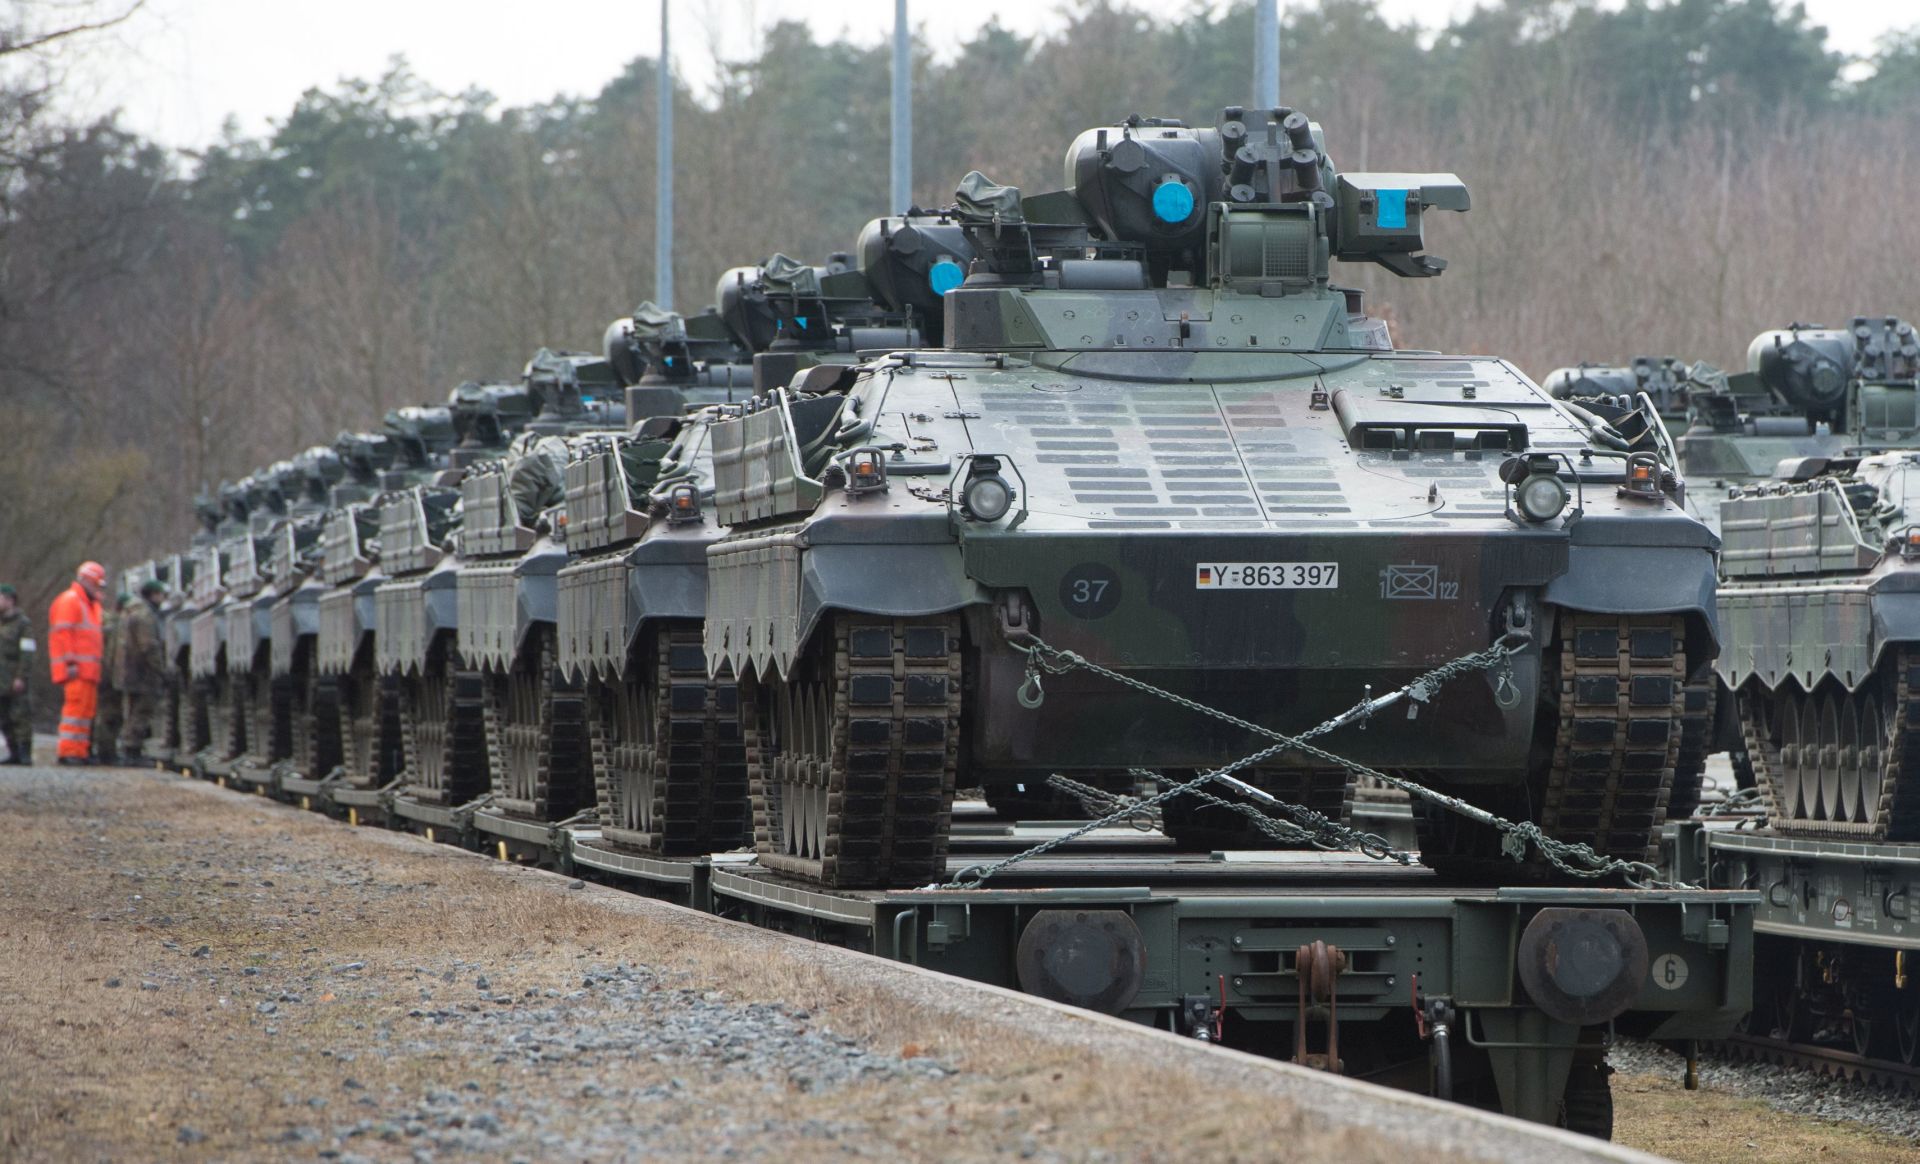 epa05806821 German army tanks of type 'Marder' are loaded onto a train for transport to Lithuania at the military training area in Grafenwoehr, Germany, 21 February 2017. Germany will deploy tanks to Lithuania as part of a NATO mission aimed to support eastern European allies.  EPA/TIMM SCHAMBERGER